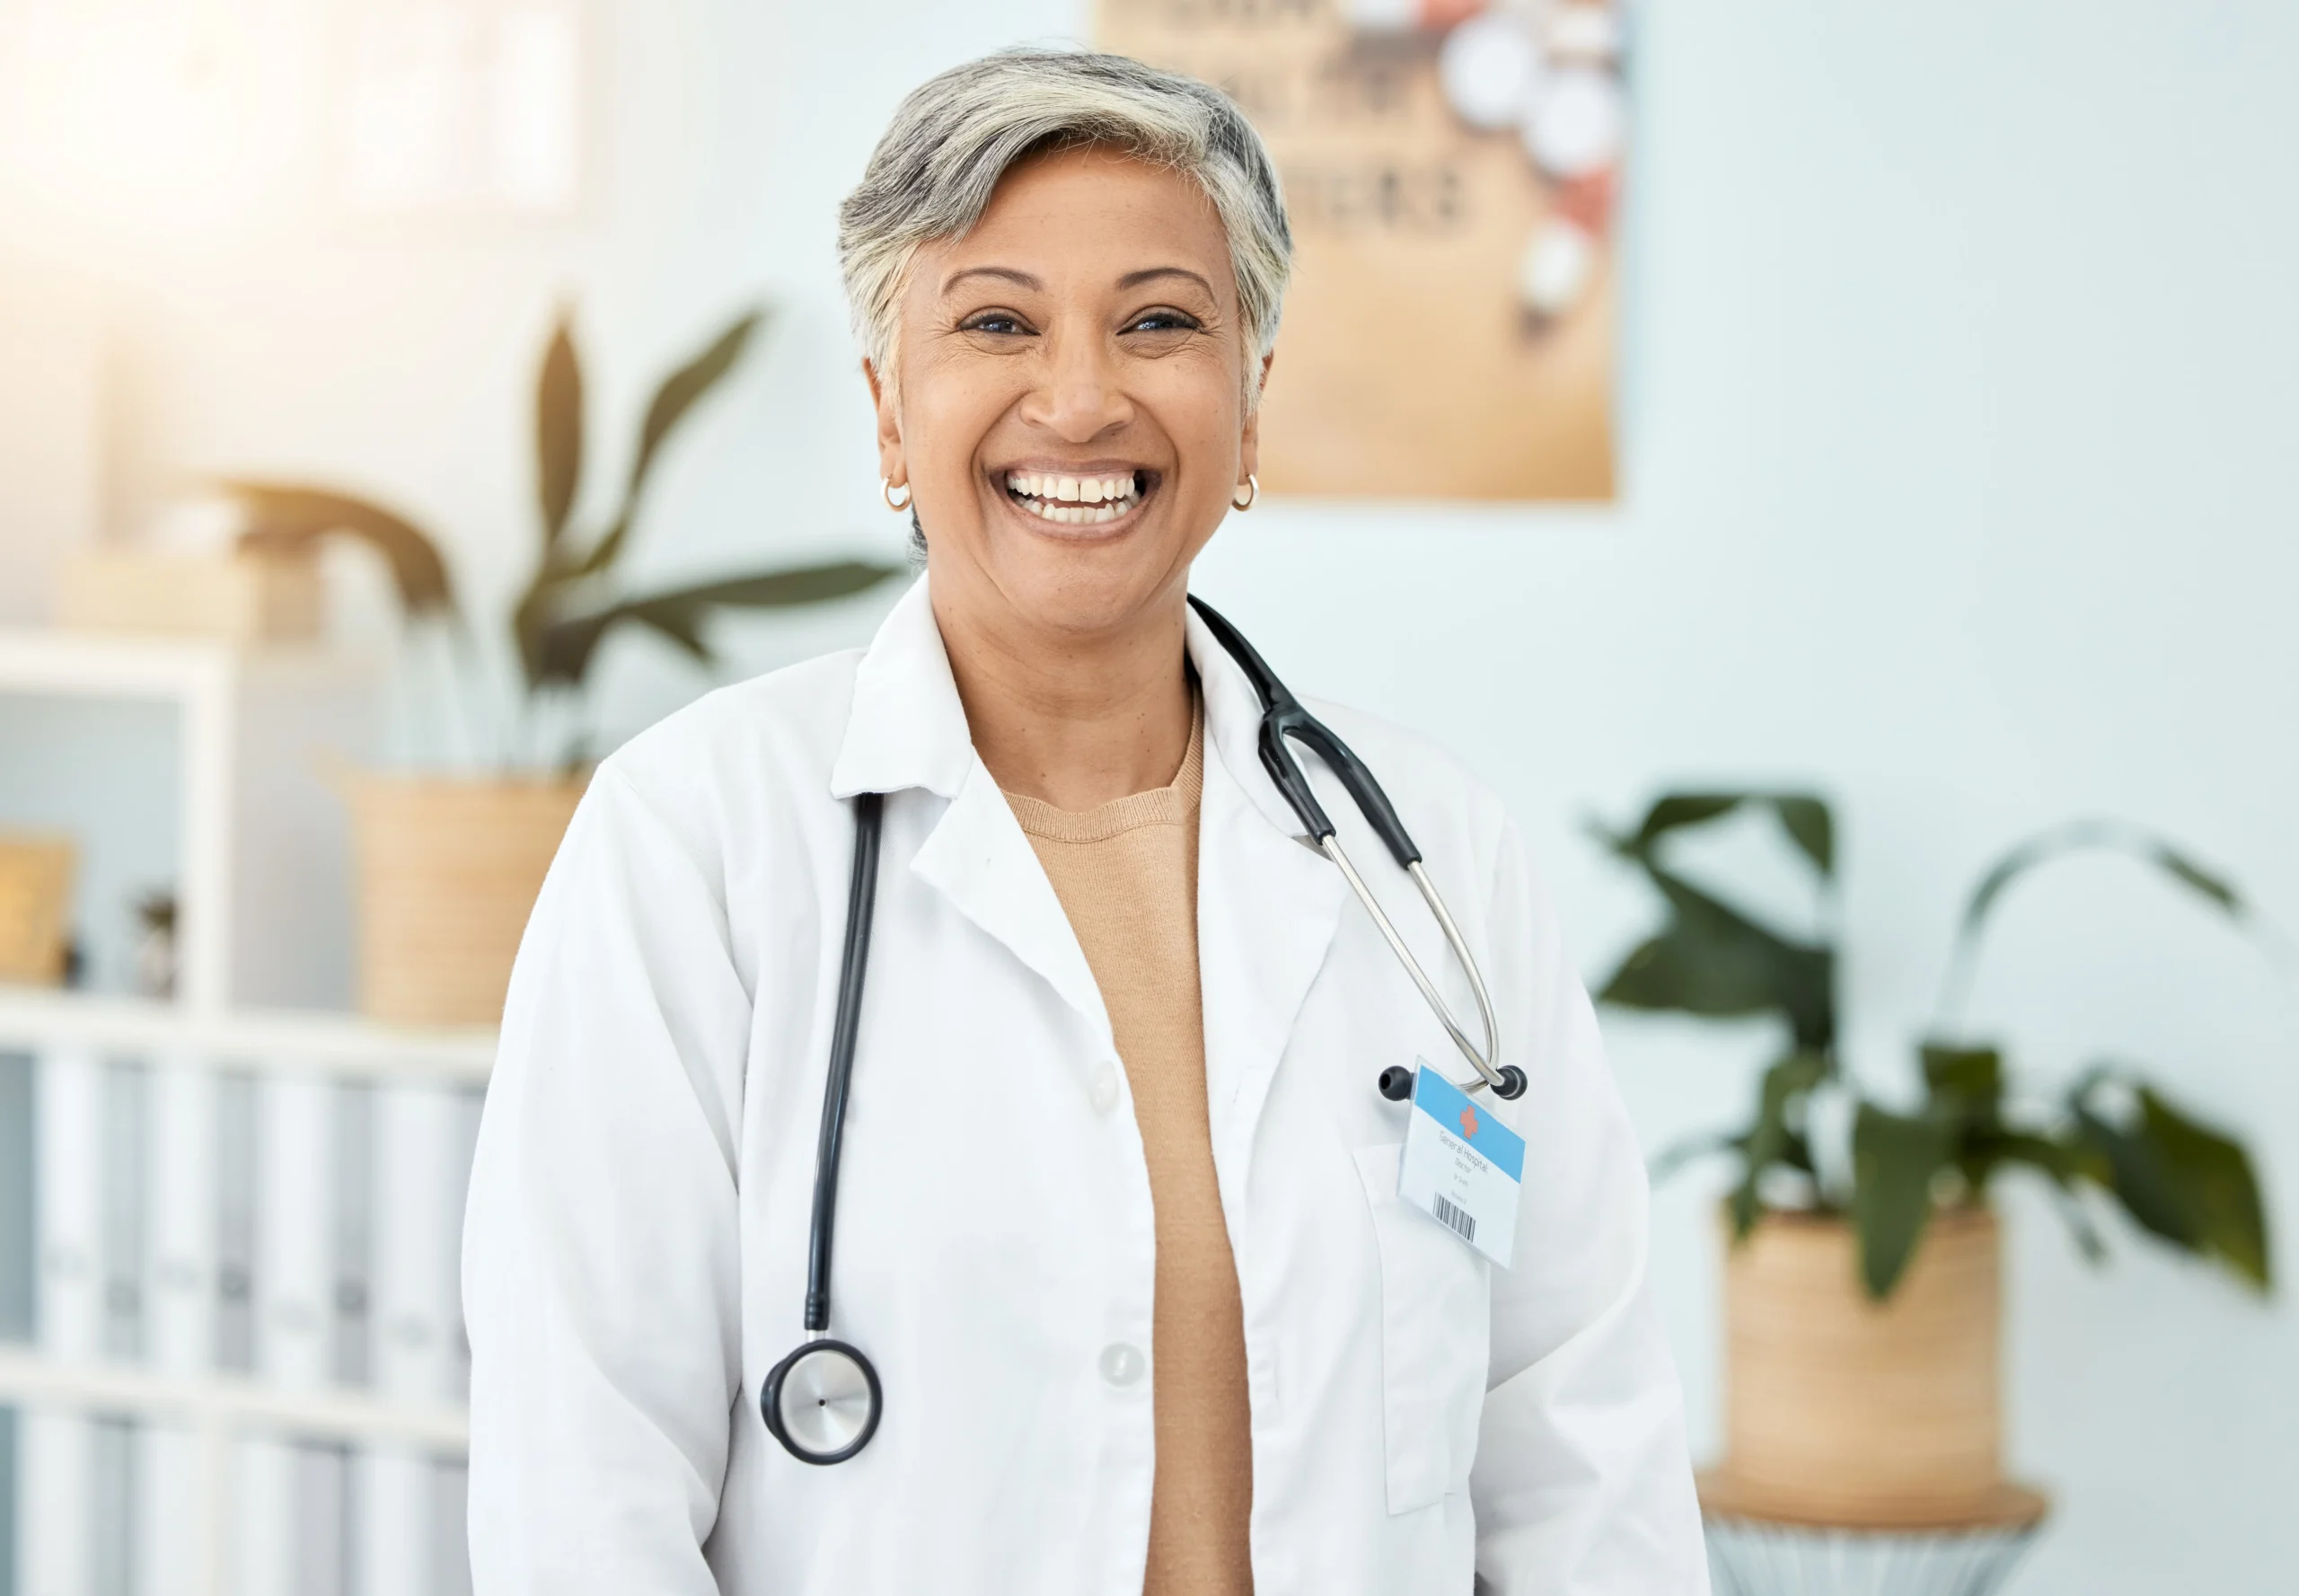 Female POC doctor in a clinic wearing a lab coat with stethoscope smiling at the camera.